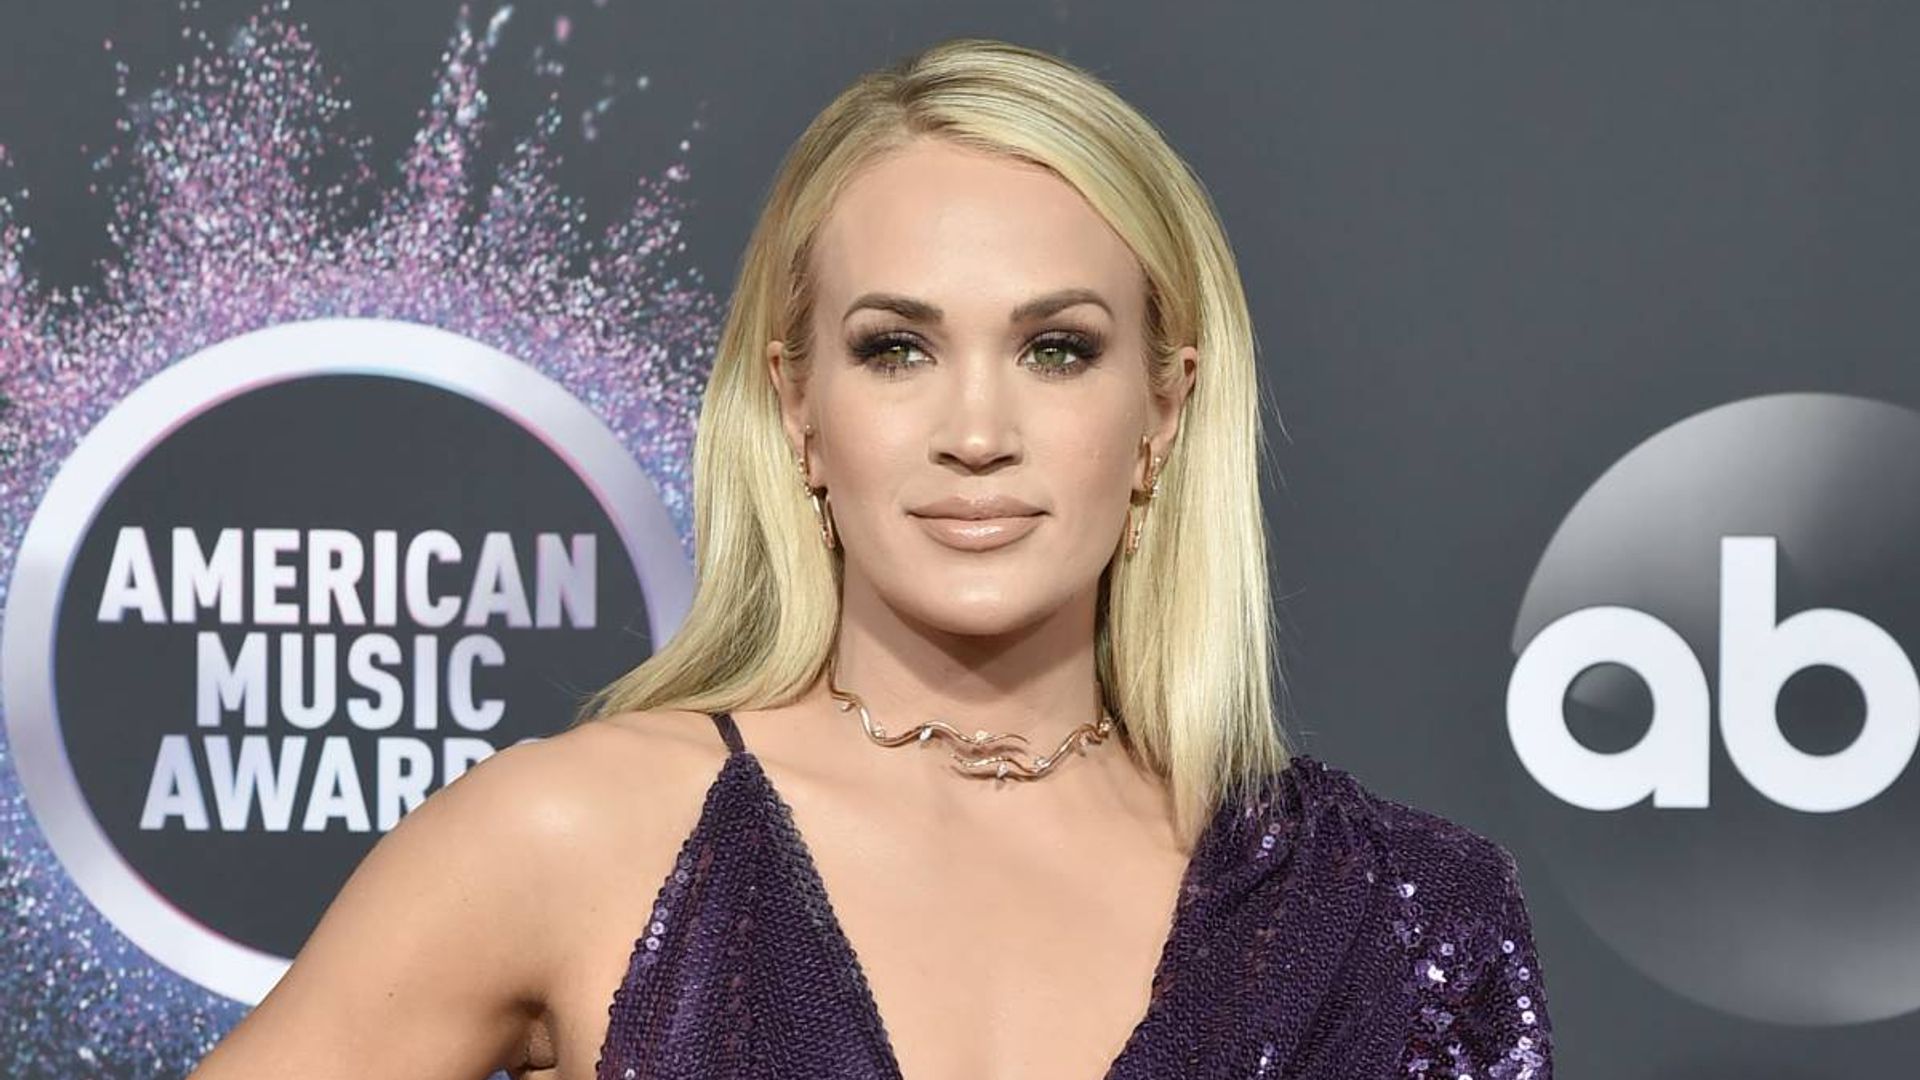 Carrie Underwood Set To Return To 'Sunday Night Football' In 2023